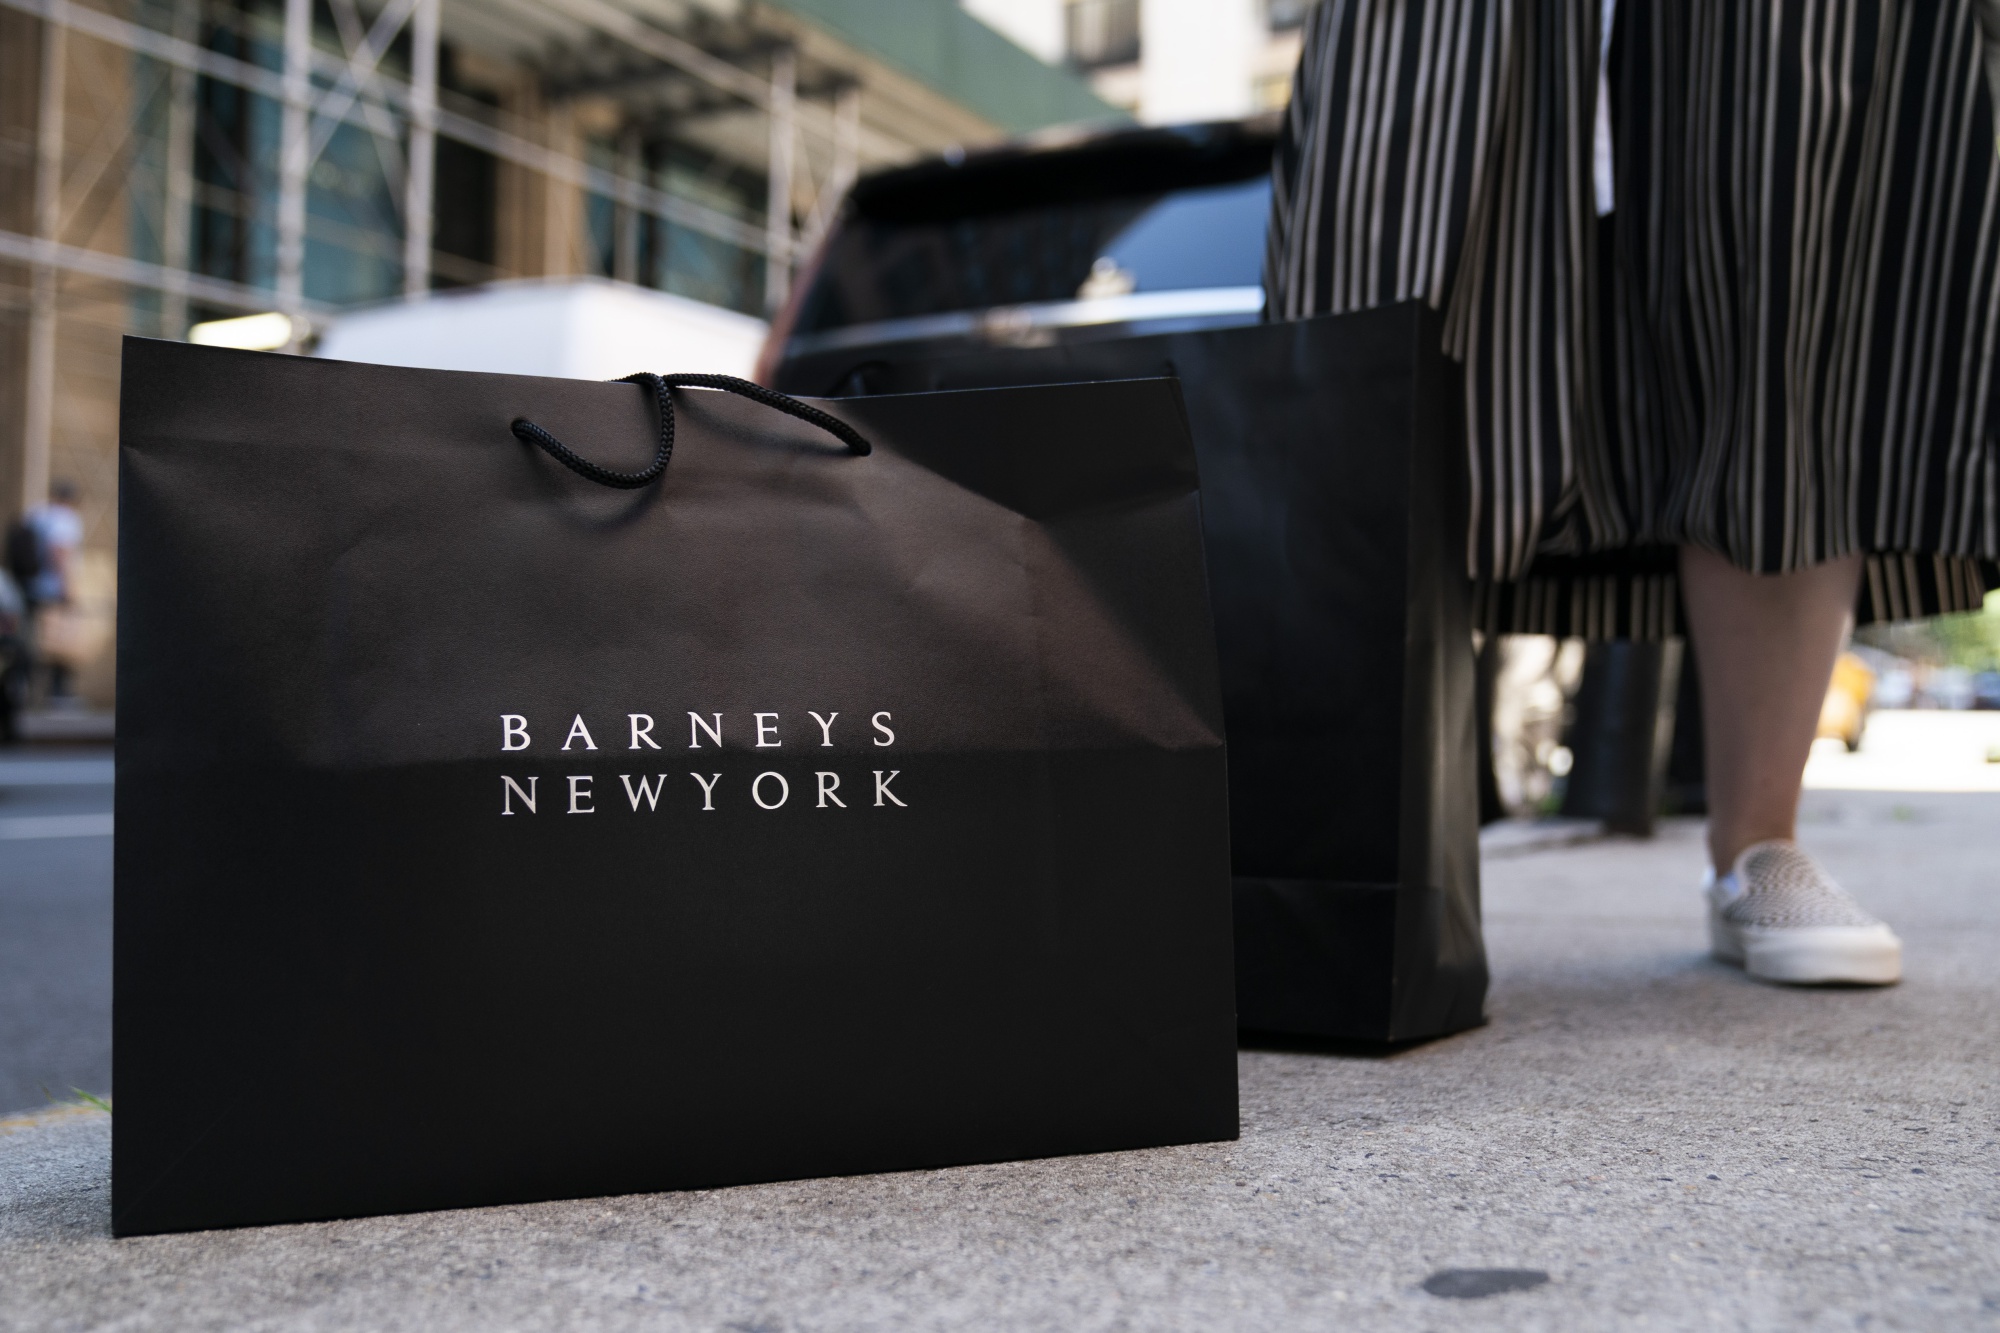 Barneys Brand Strategy and the Luxury Market